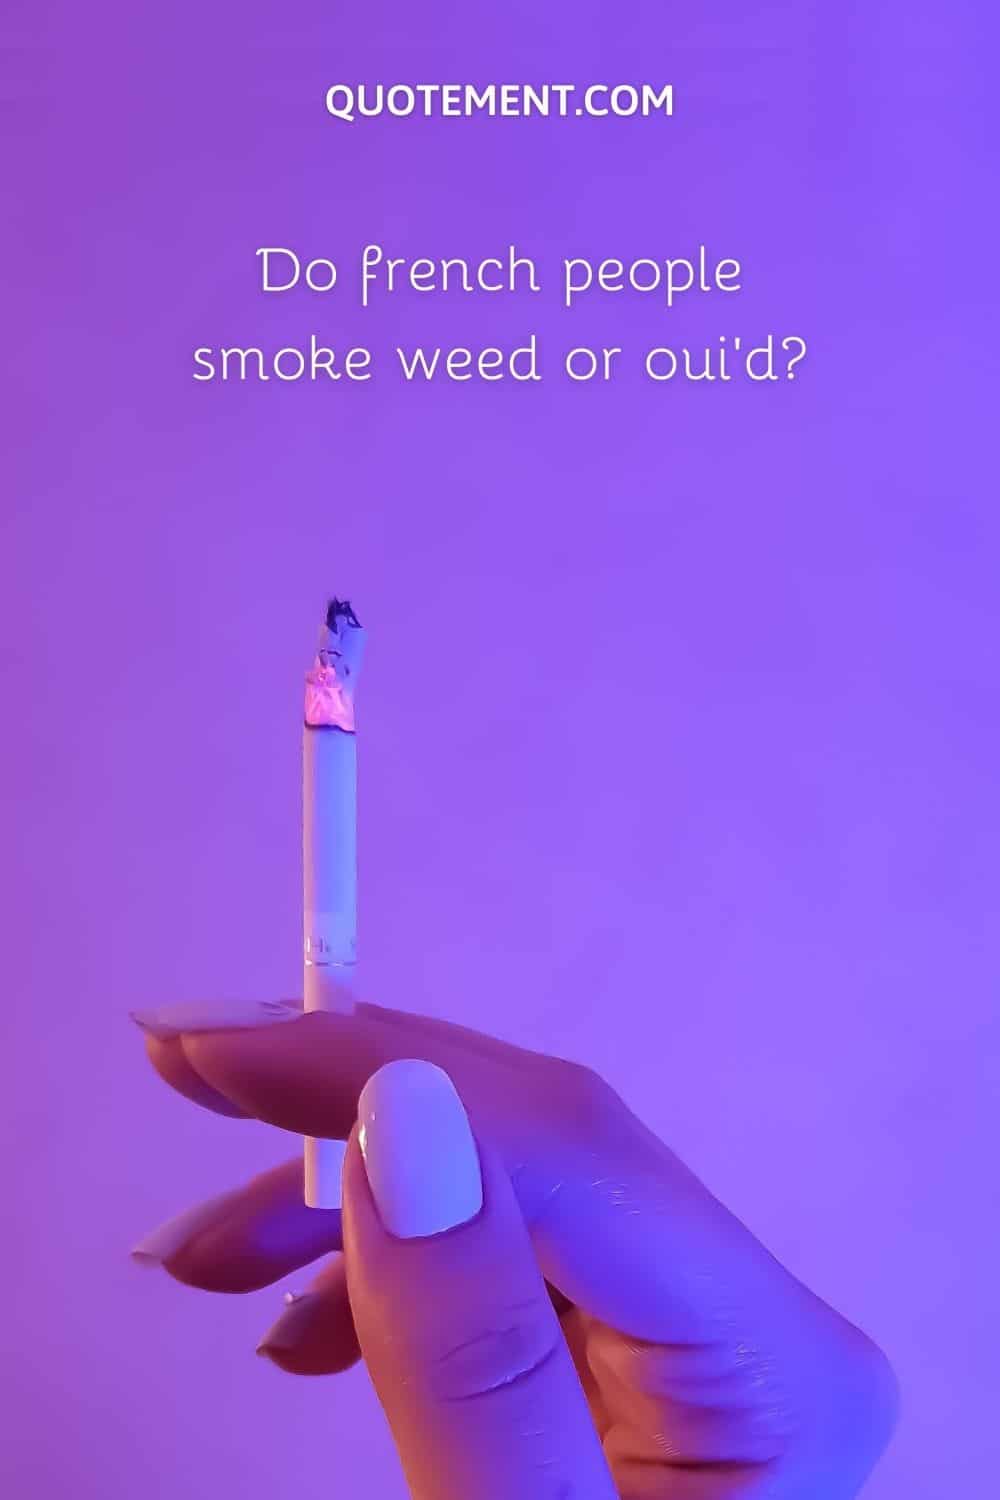 Do french people smoke weed or oui’d